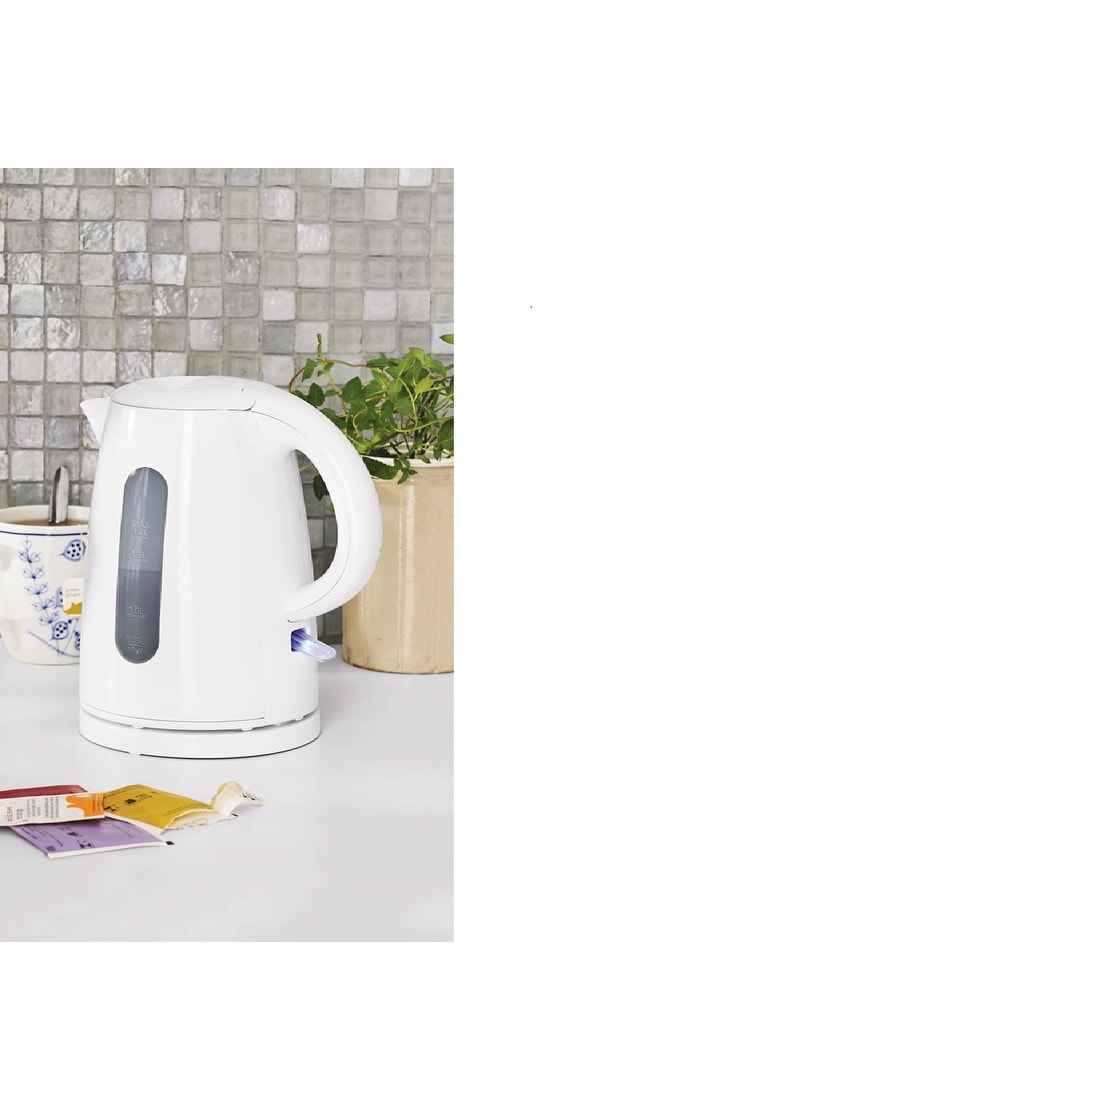 https://ak1.ostkcdn.com/images/products/is/images/direct/5556376abe435b34813075bae77d10367ff3d908/1.7-Liter-Plastic-Electric-Kettle%2C-White.jpg